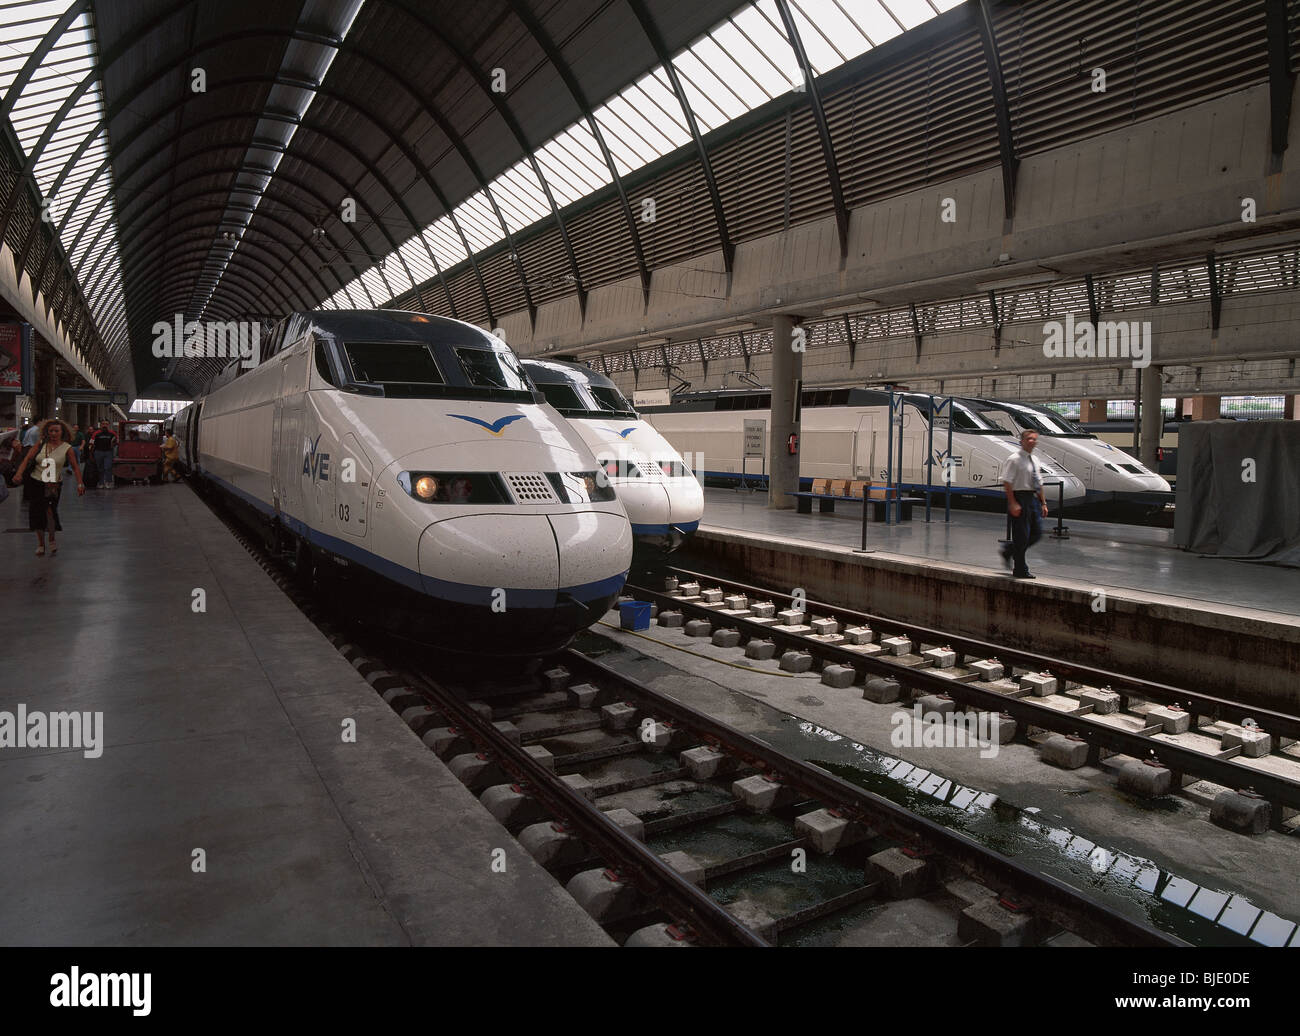 AVE (HIGH SPEED TRAIN SPANISH). Trains on Santa Justa station. Seville. Andalusia. Spain. Stock Photo